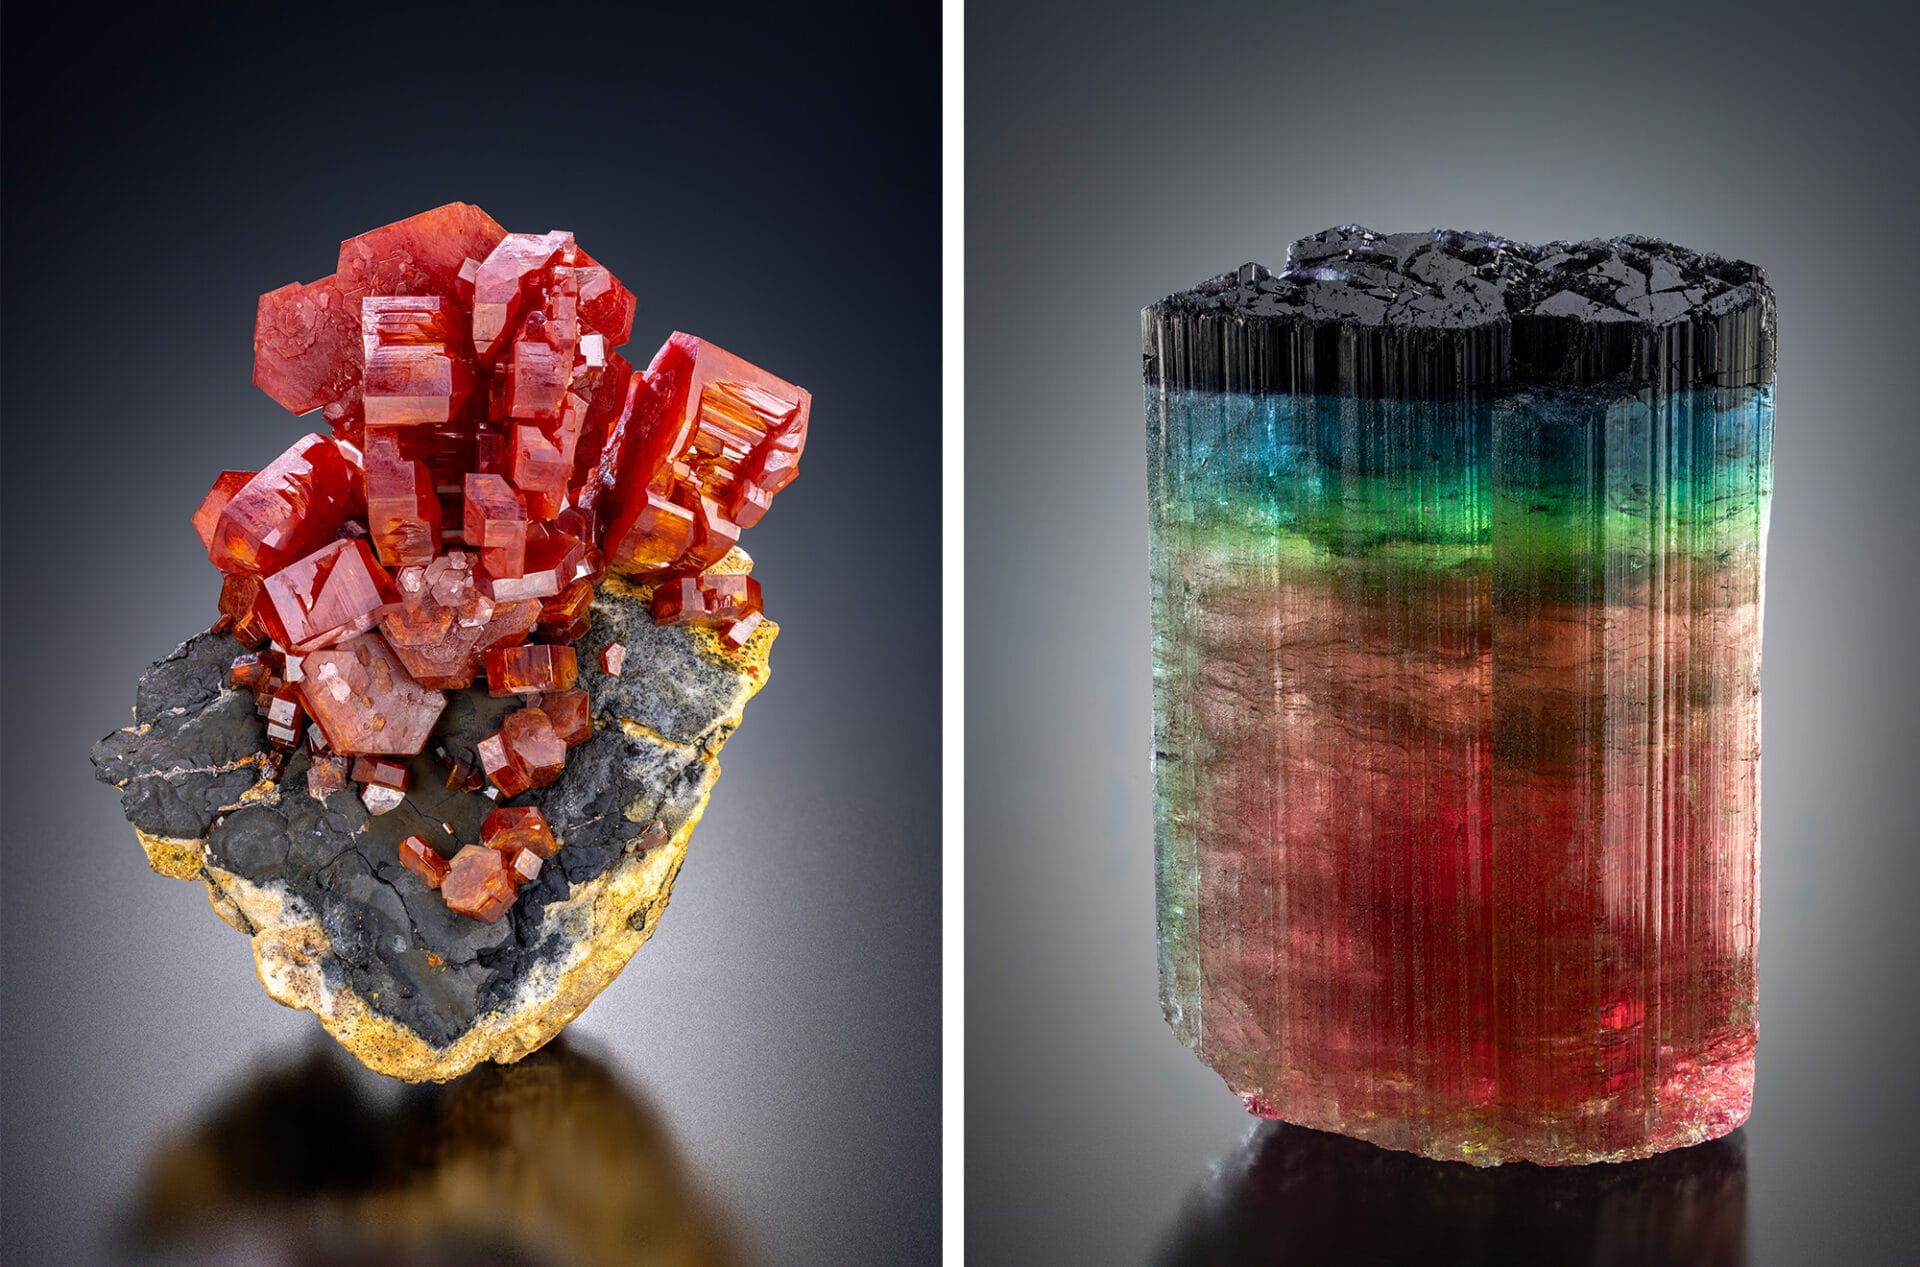 A side-by-side image of two minerals. On the left, red crystalline nodes grow out of a dark base. On the right, a pillar crystal has a prismatic color scheme with a black top.